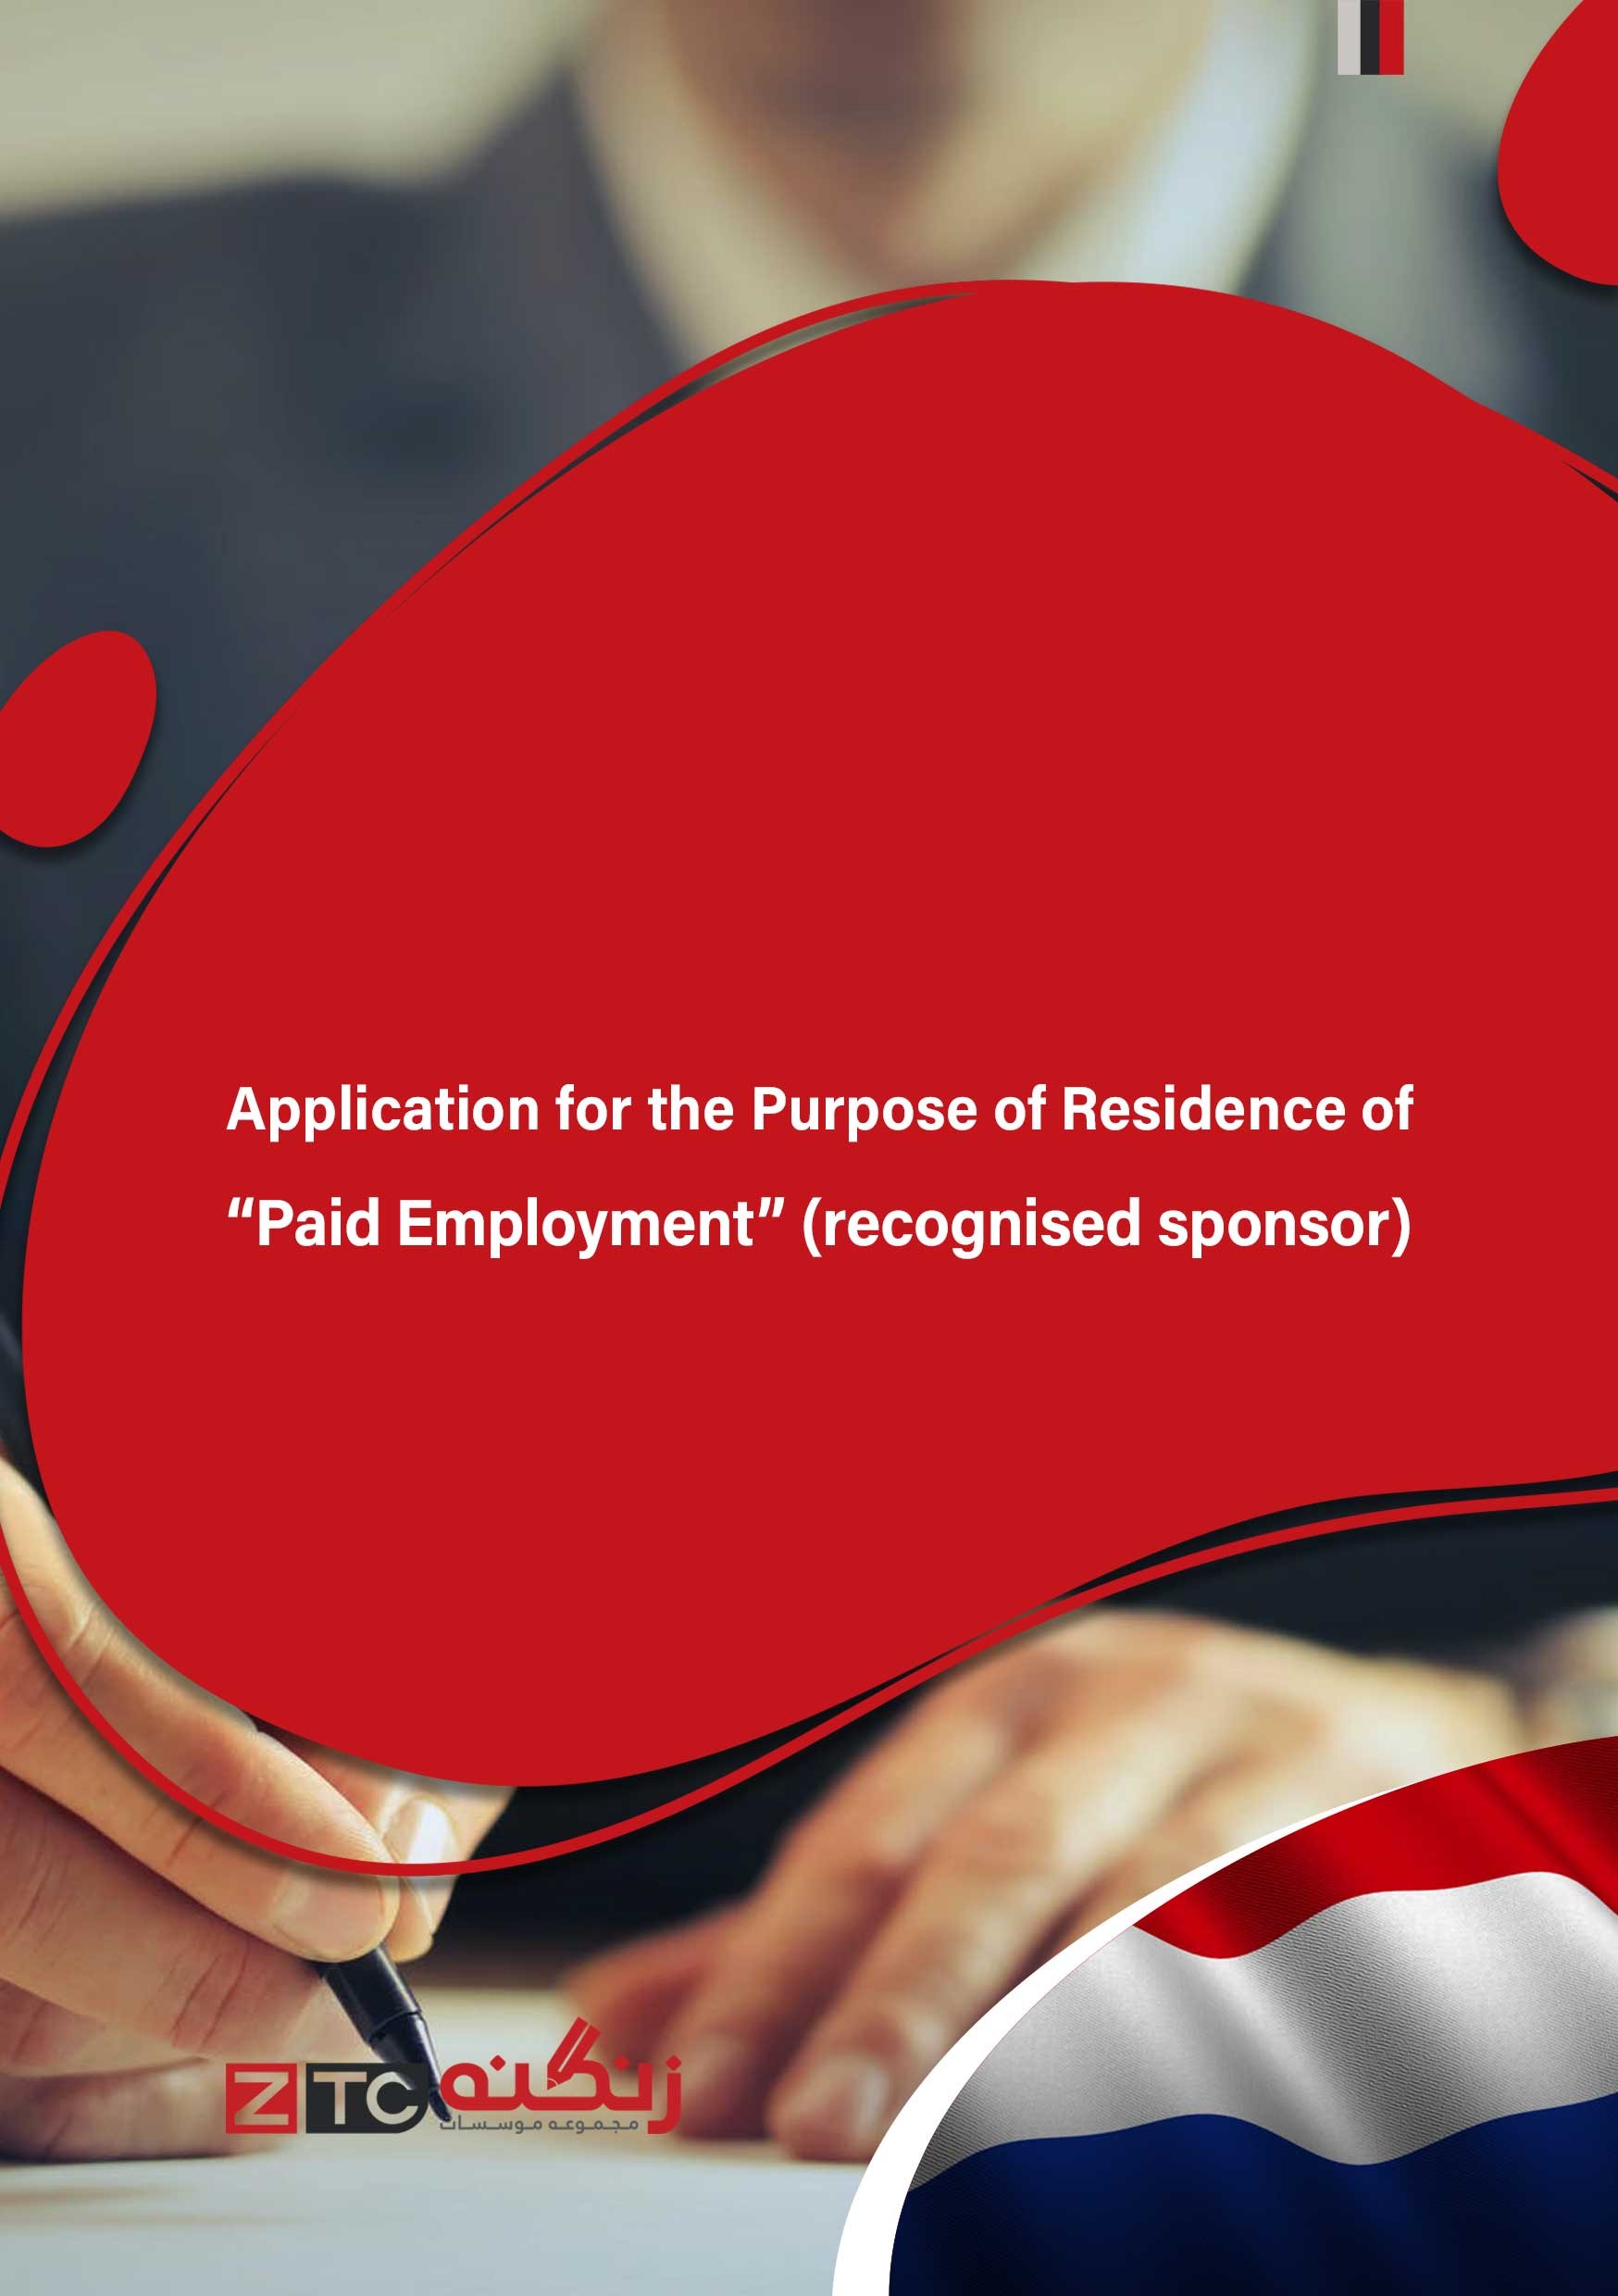 Application for the Purpose of Residence of “Paid Employment” (recognised sponsor)